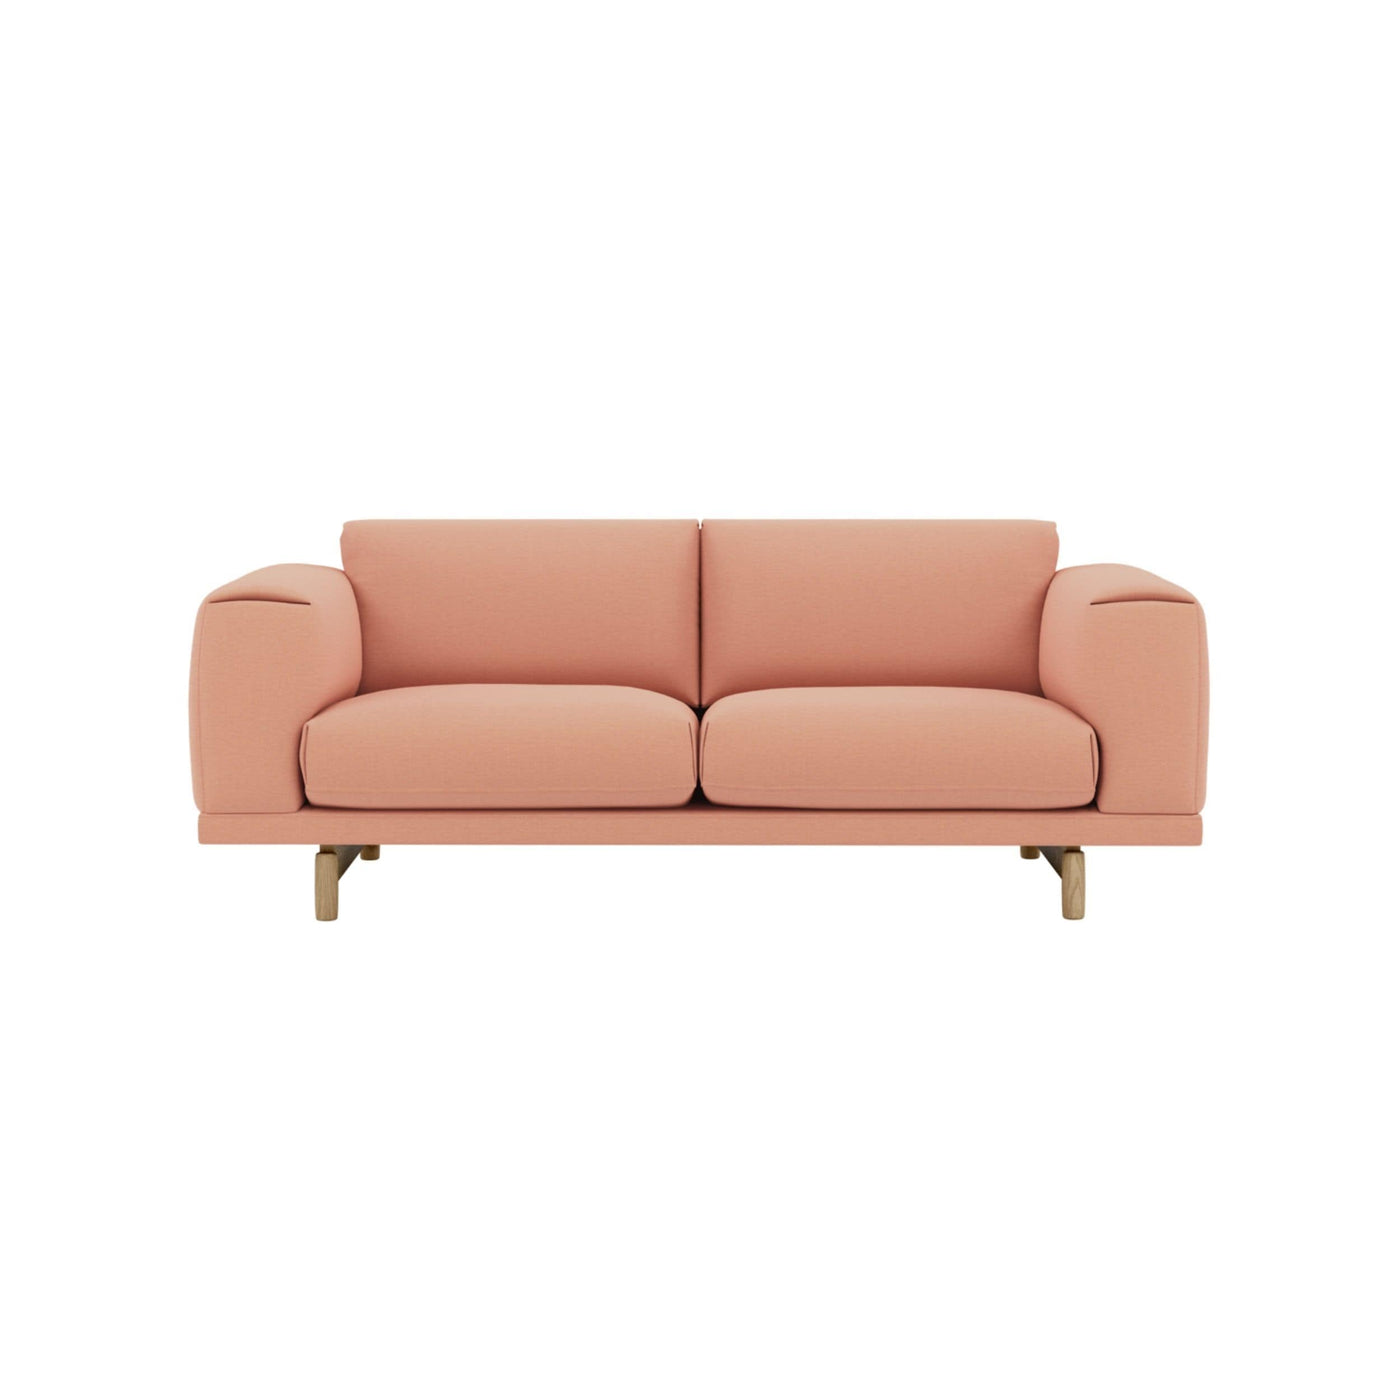 Muuto Rest Sofa in steelcut trio 515. Made to order from someday designs. #colour_steelcut-trio-515